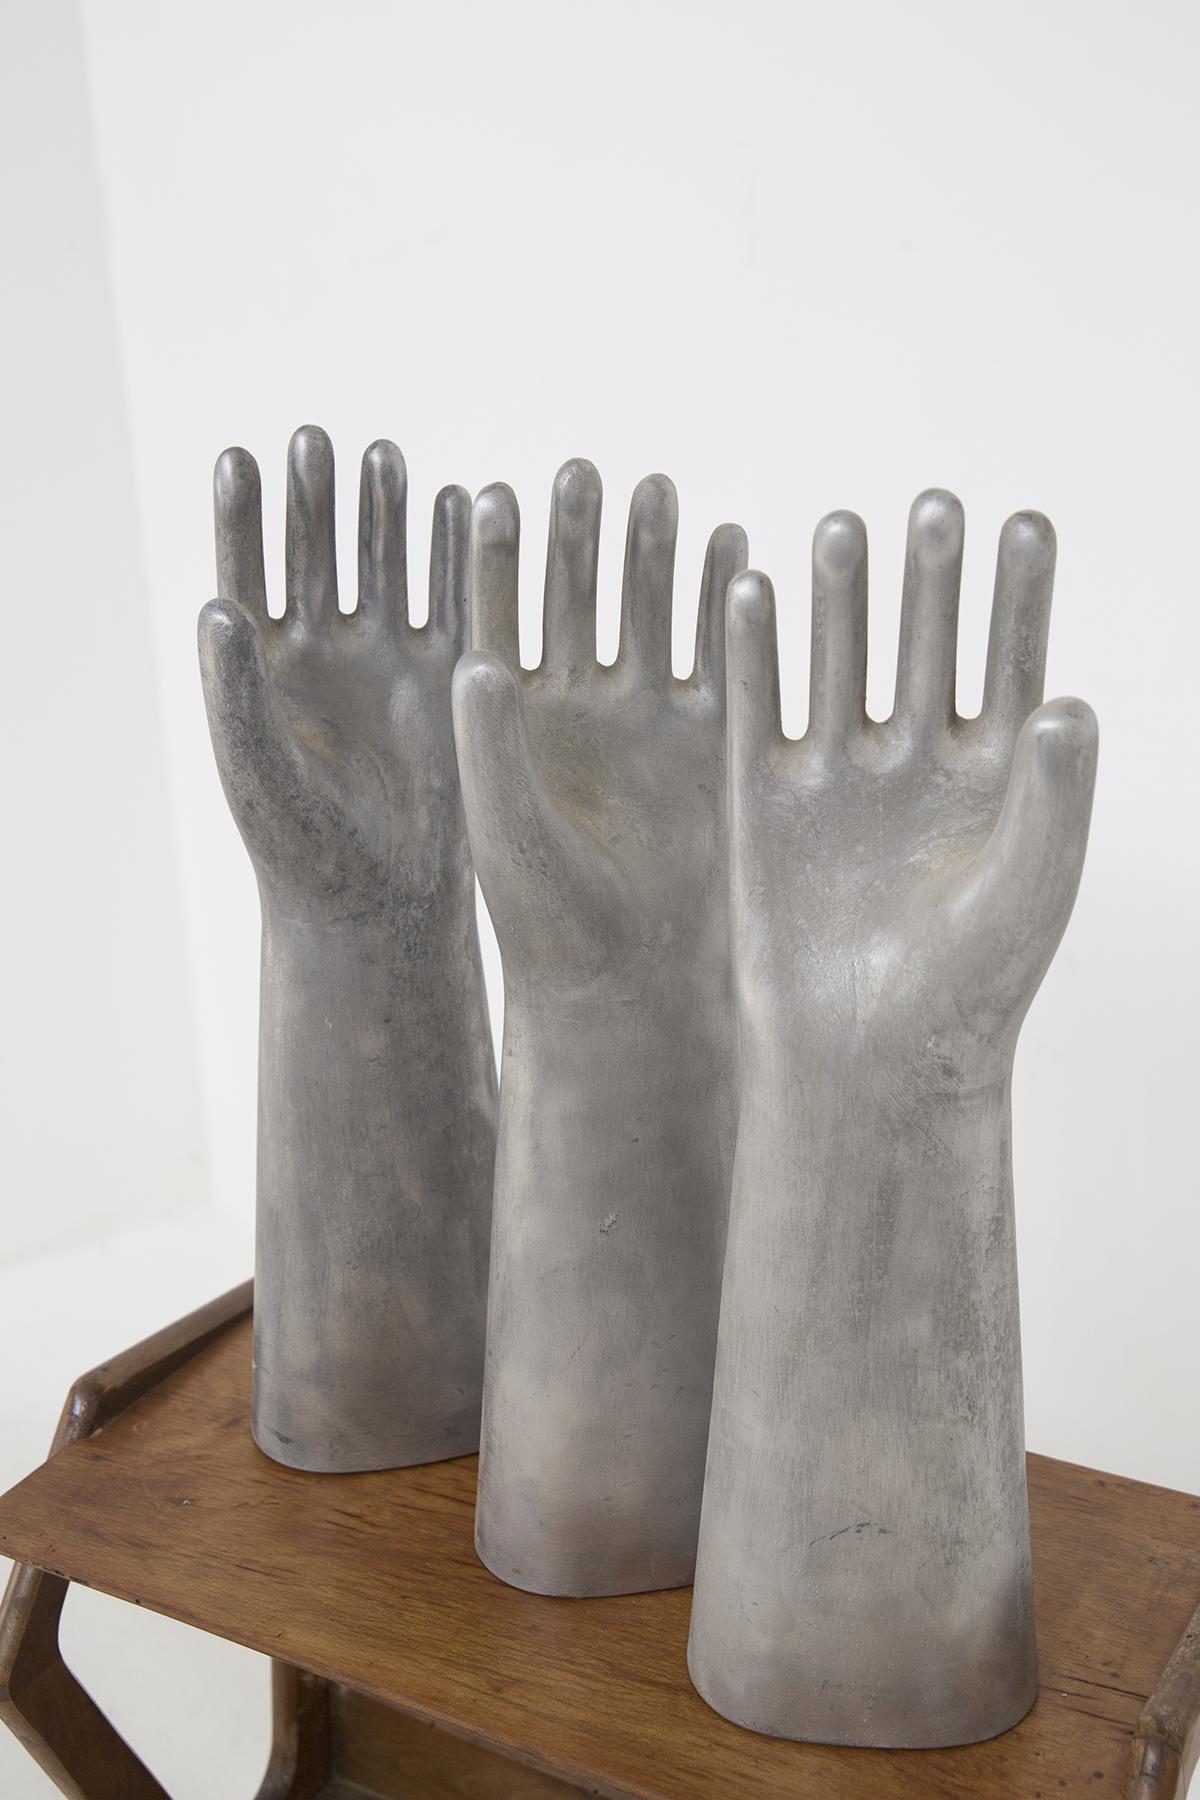 Handmade moulds in aluminium casting from 1950s. The composition is of three hand moulds, all of them Medium size. The moulds are the structure that Gio Ponti subsequently used to create his famous sculpture: The hand for Richard Ginori. The moulds